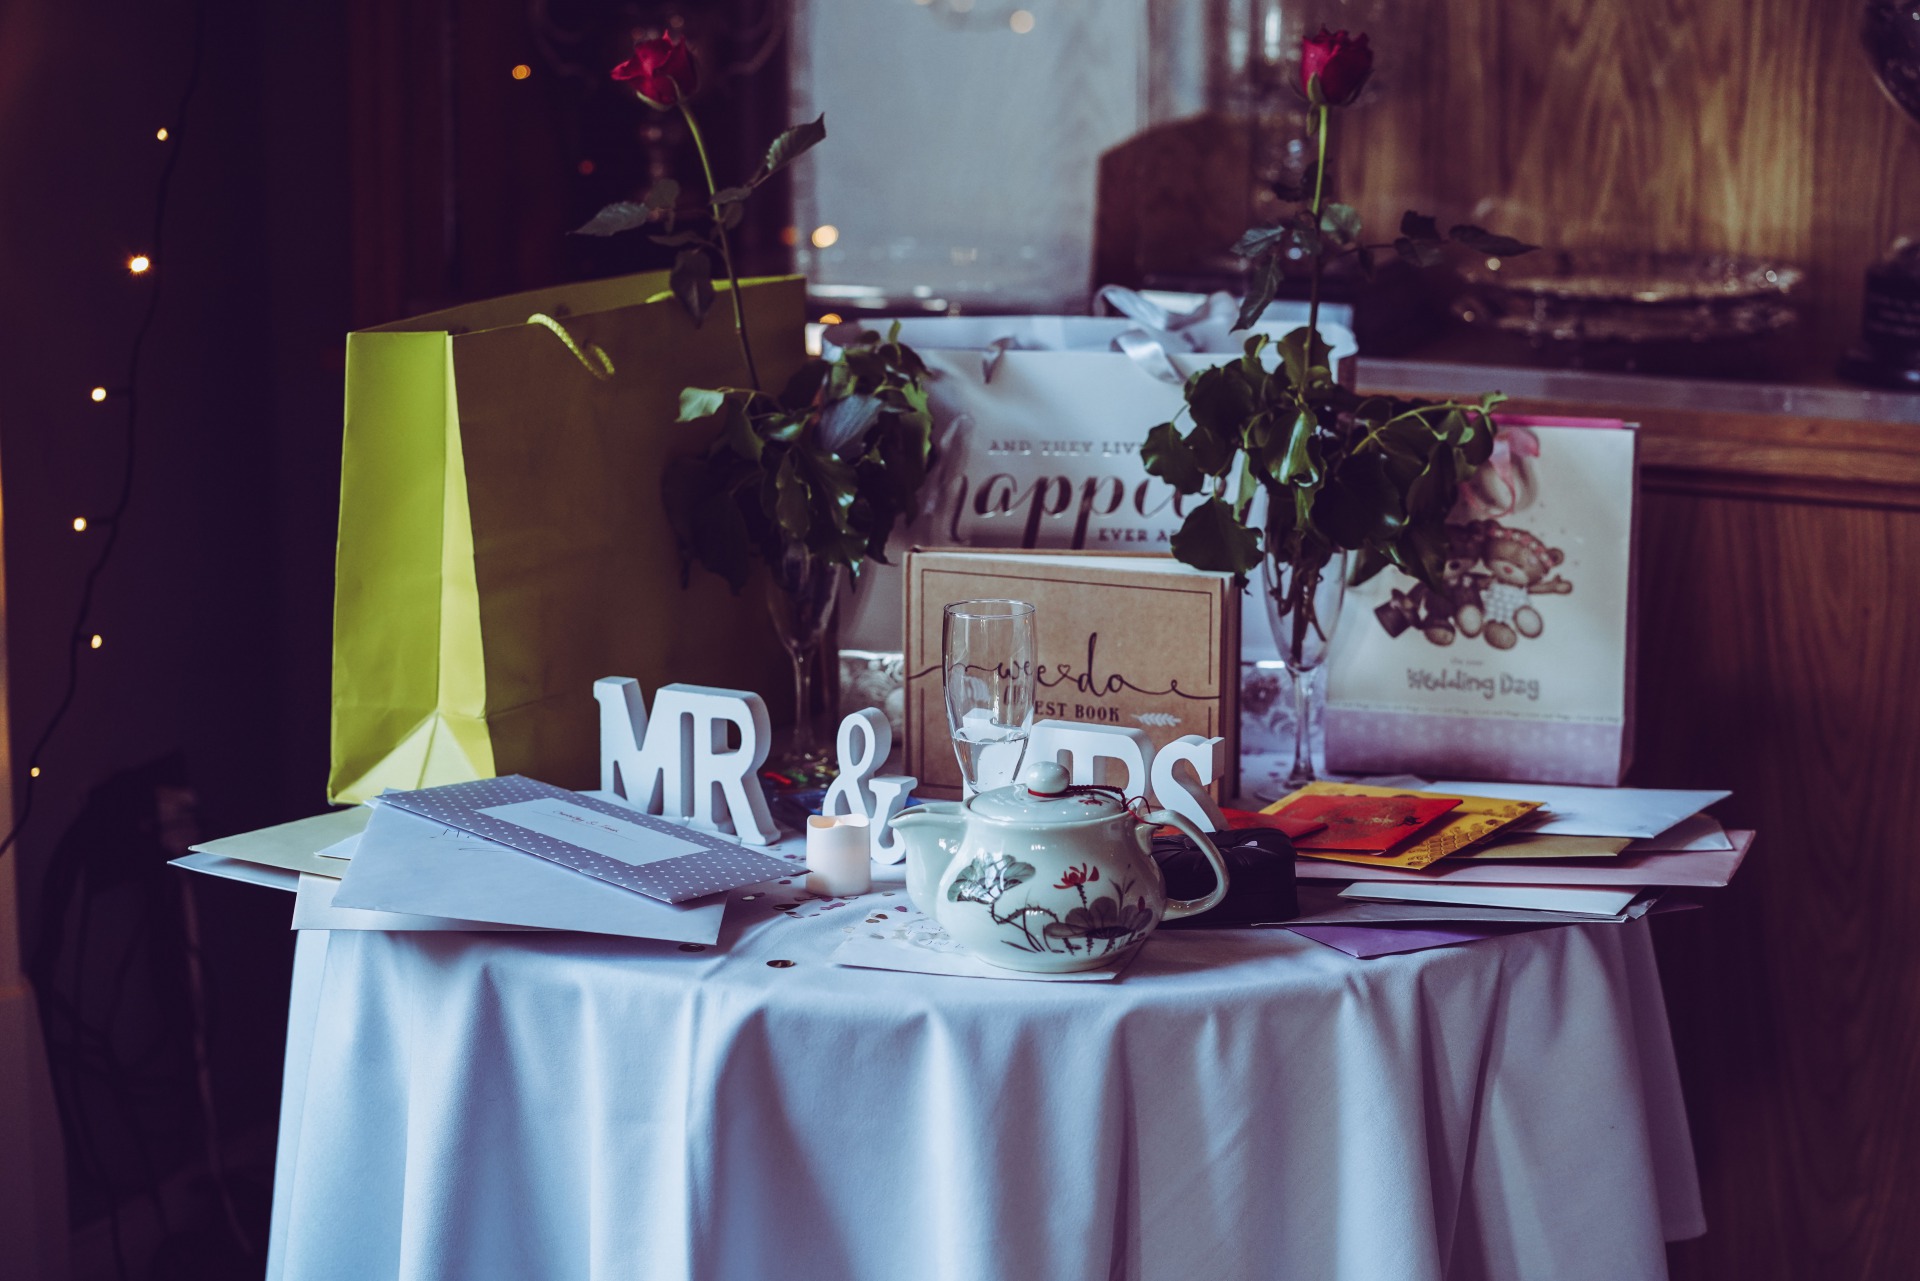 Wedding decor and gifts on a table with white linens. Yomex Owo GYq4Q0vmwfw Unsplash